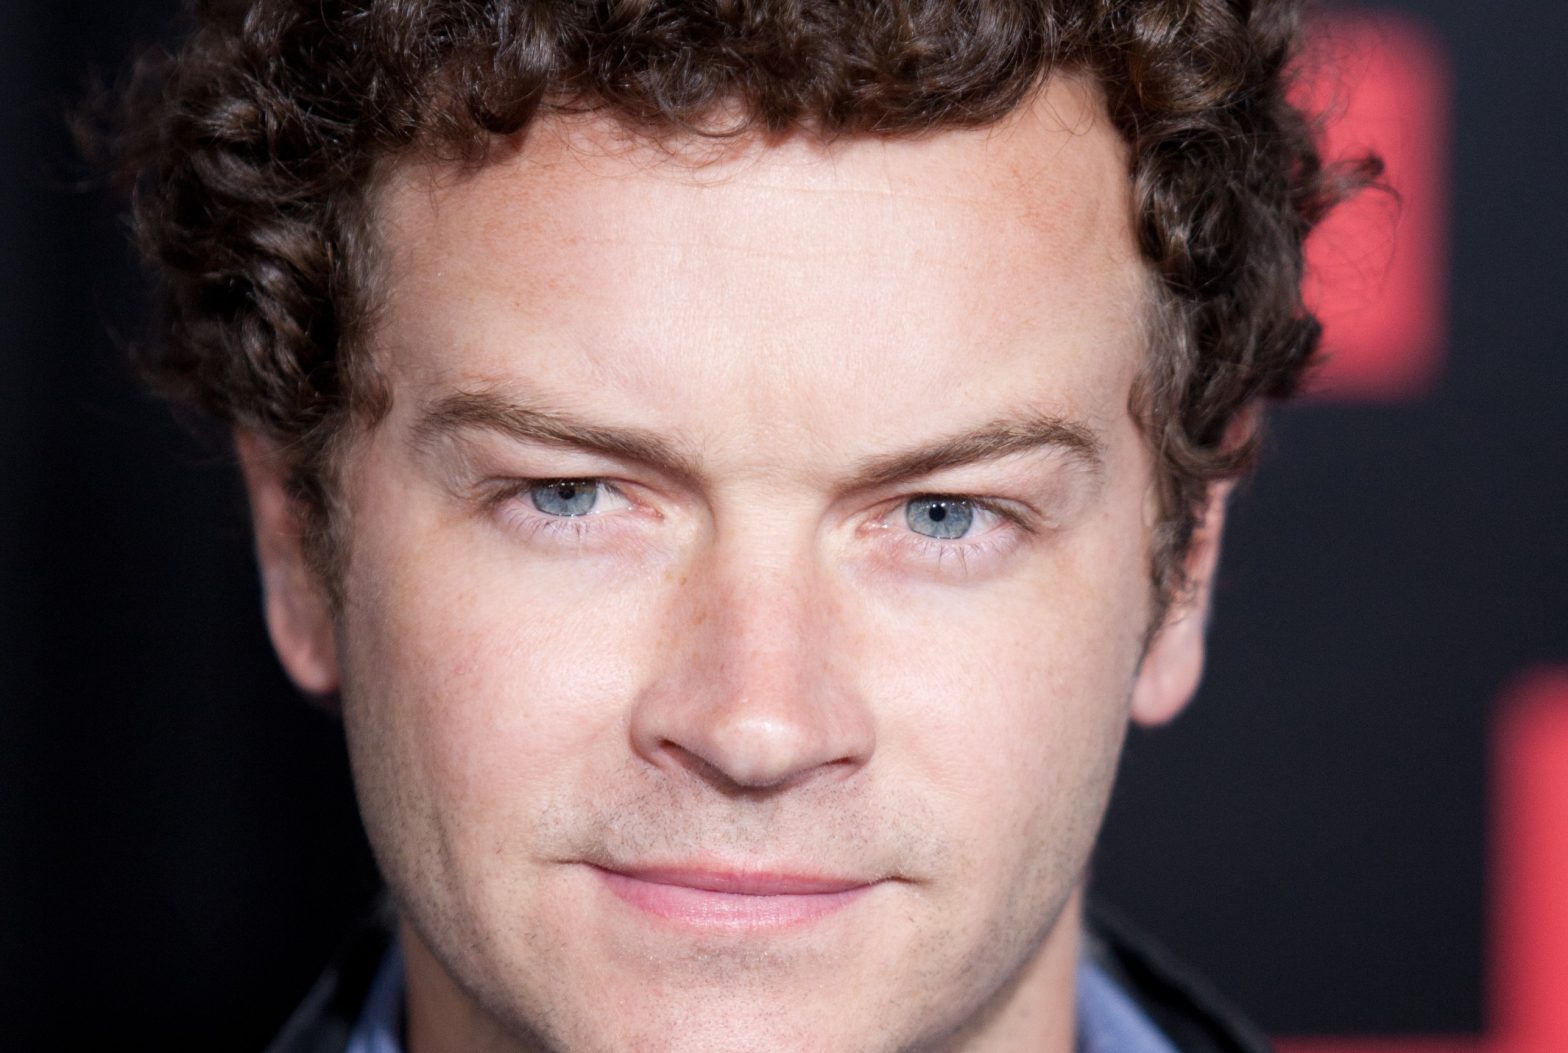 Danny Masterson headshot. News - Former sitcom star Danny Masterson set for state prison after surrendering 23 firearms